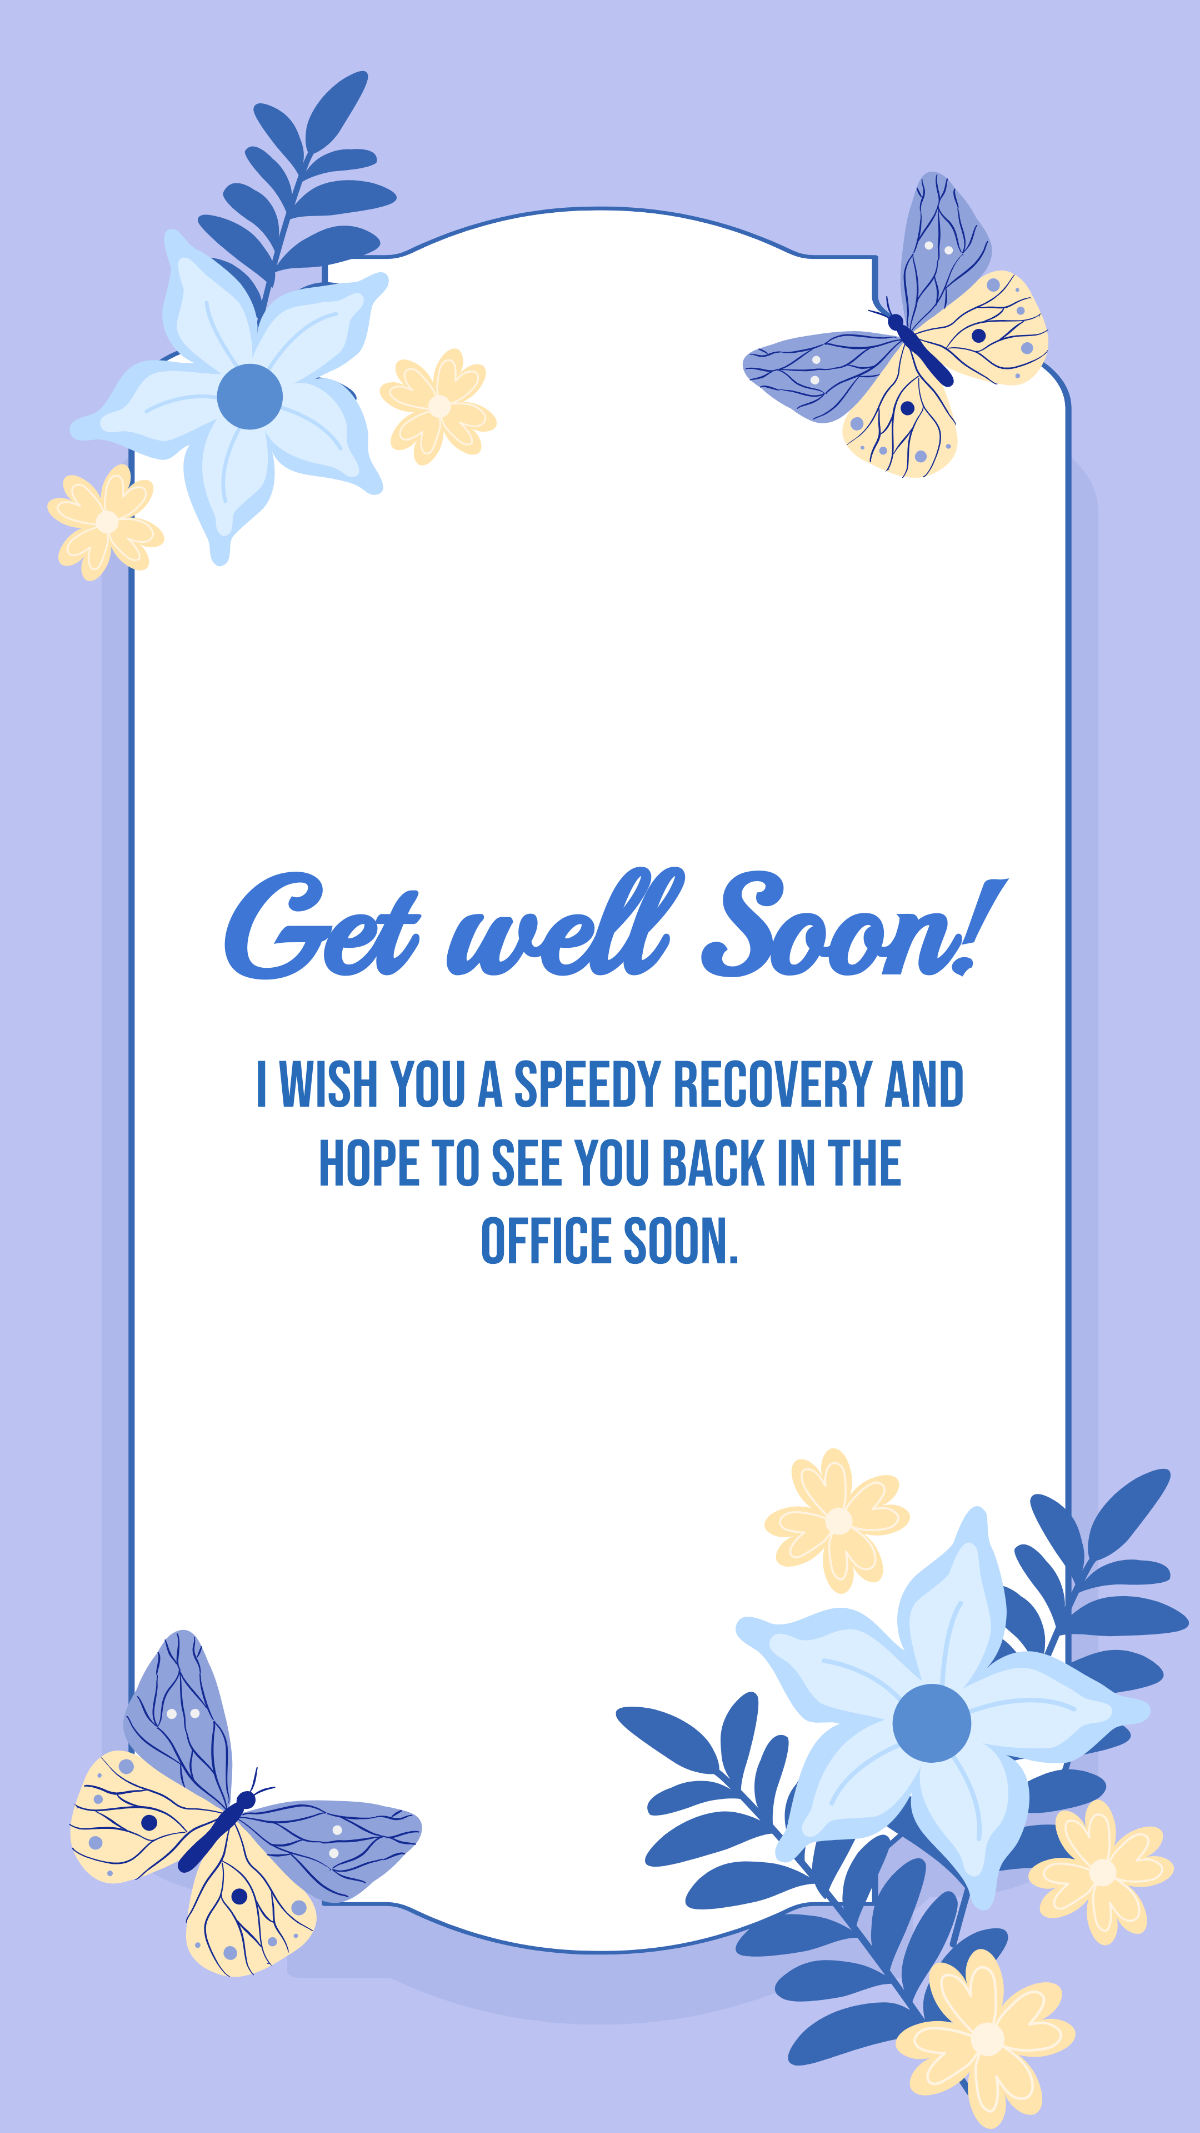 Get Well Soon Message For Boss